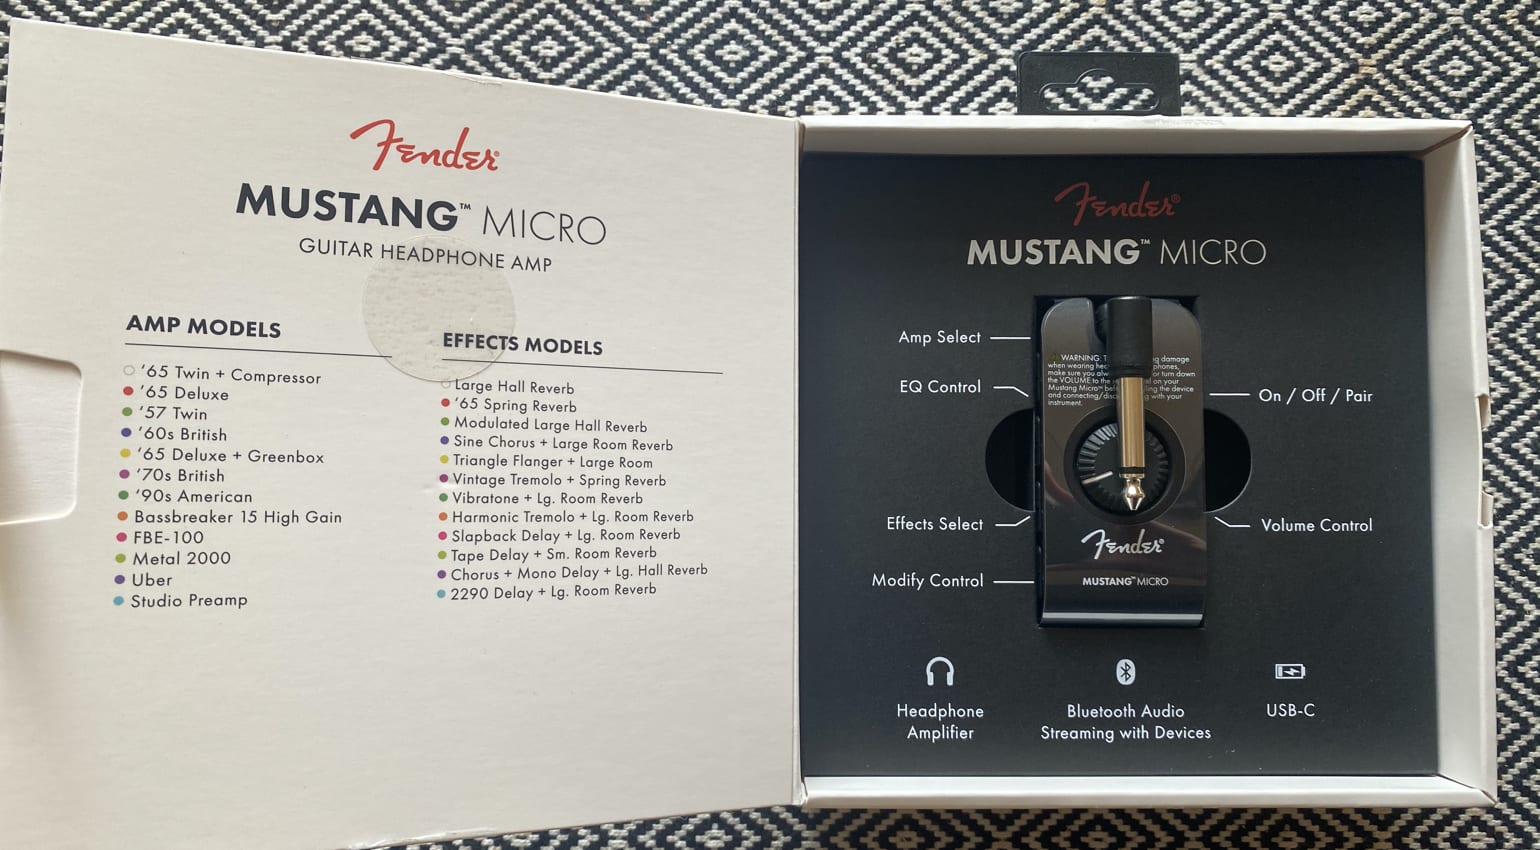 Fender Mustang Micro .What's in the box?